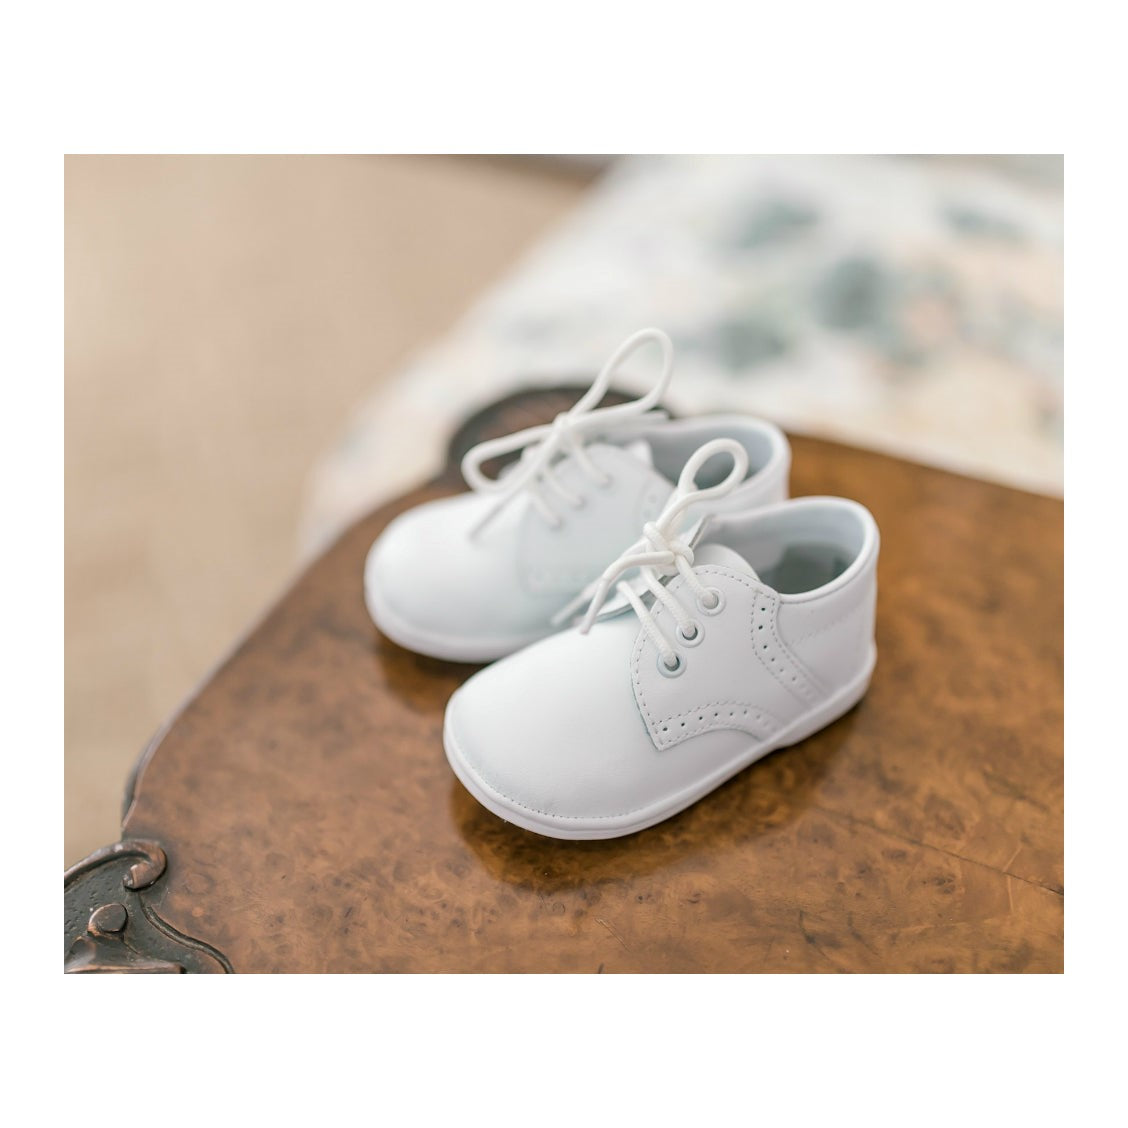 Angel James Boy's White Leather Lace Up Shoe (Baby)